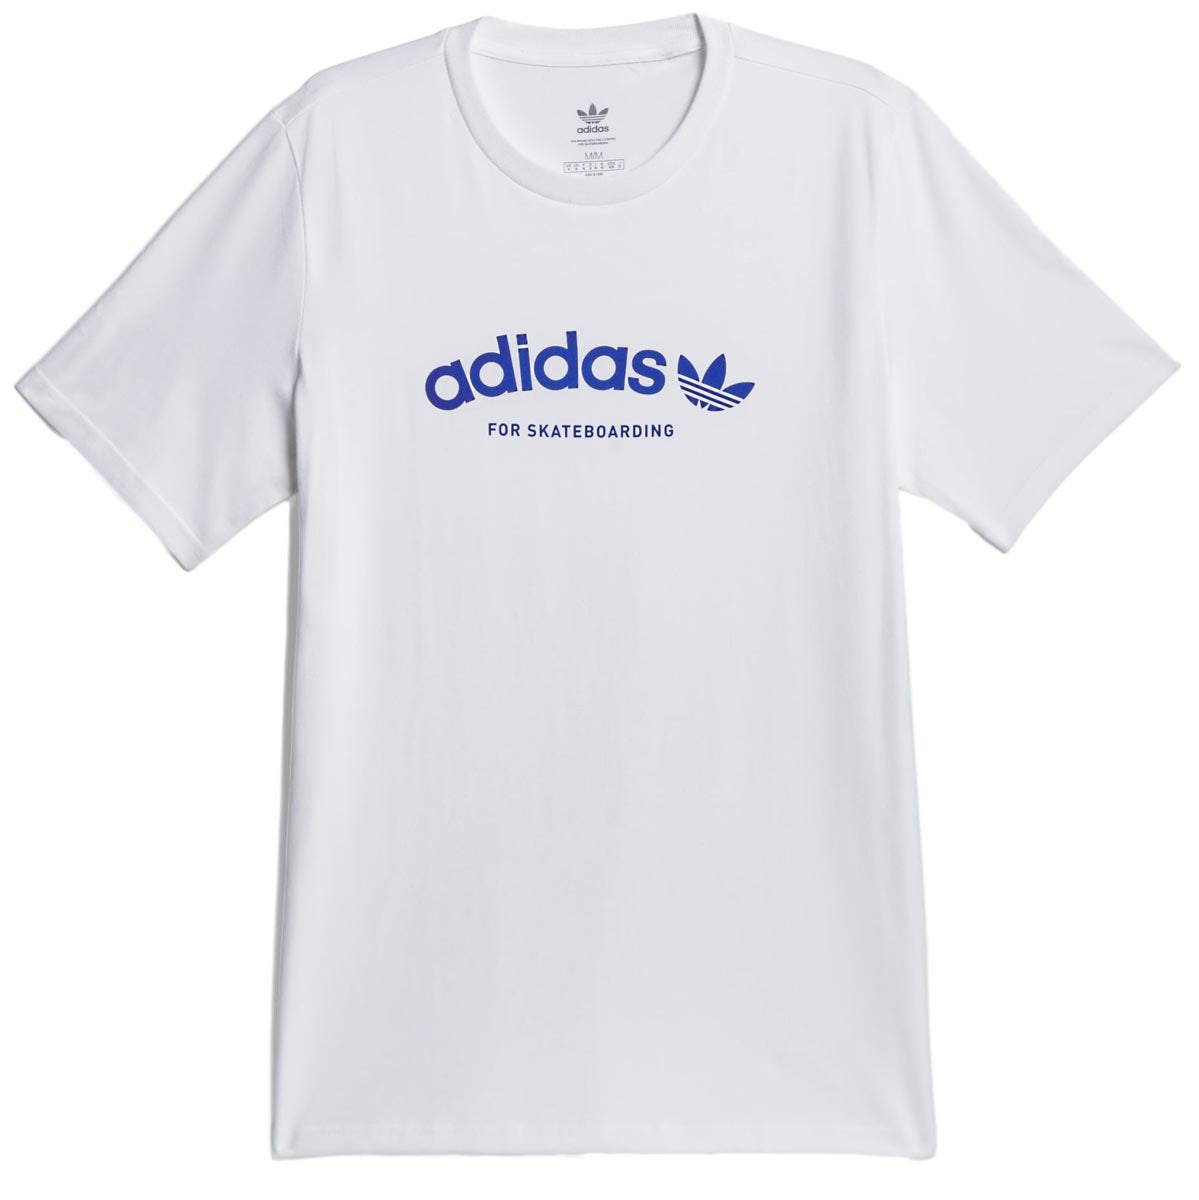 Adidas 4.0 Arched T-Shirt - White/Team Royal Blue image 1